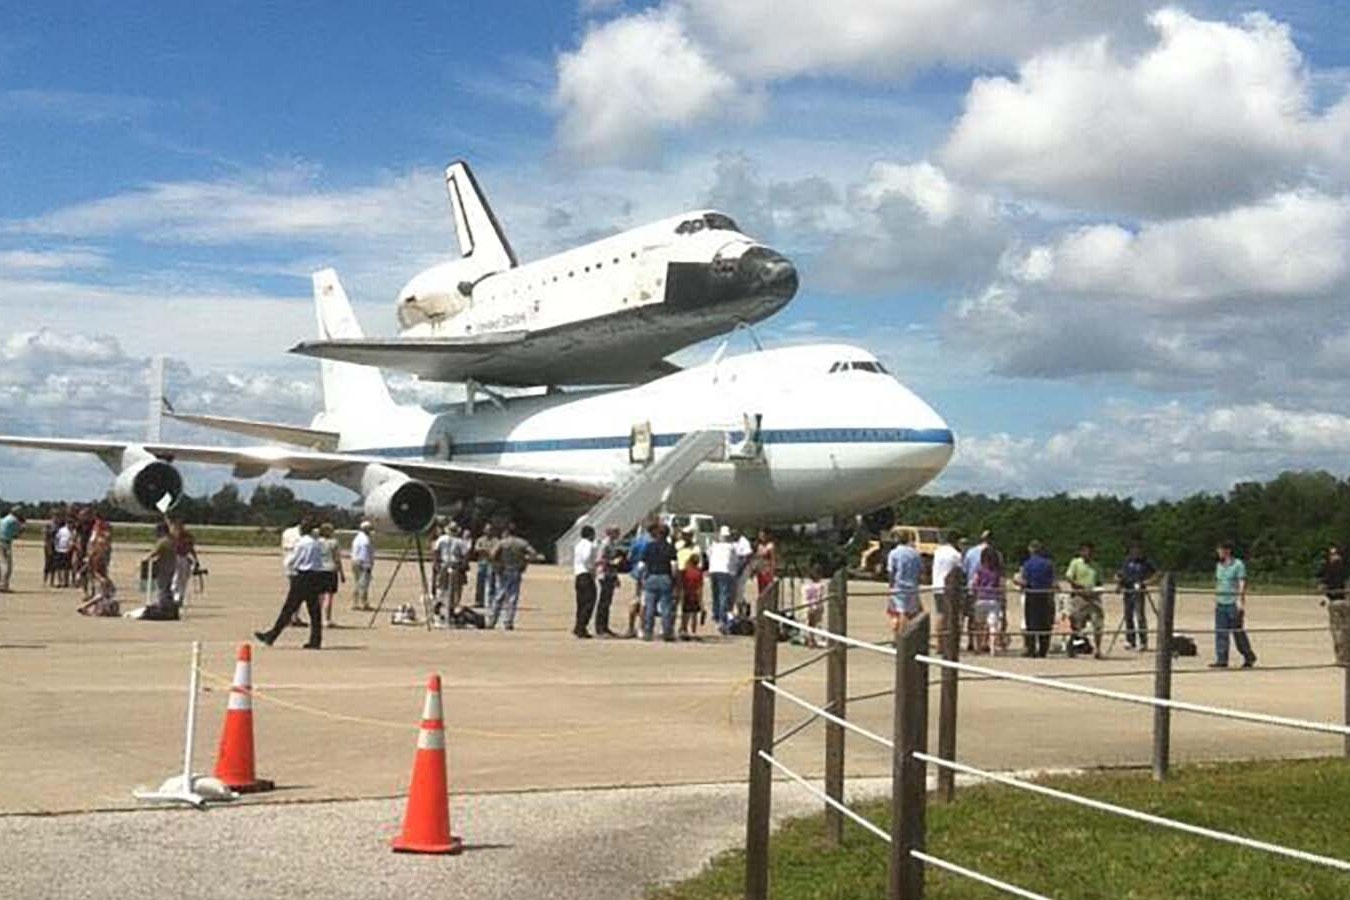 The space shuttle on a 747 at Ellington Field in Houston, Texas.